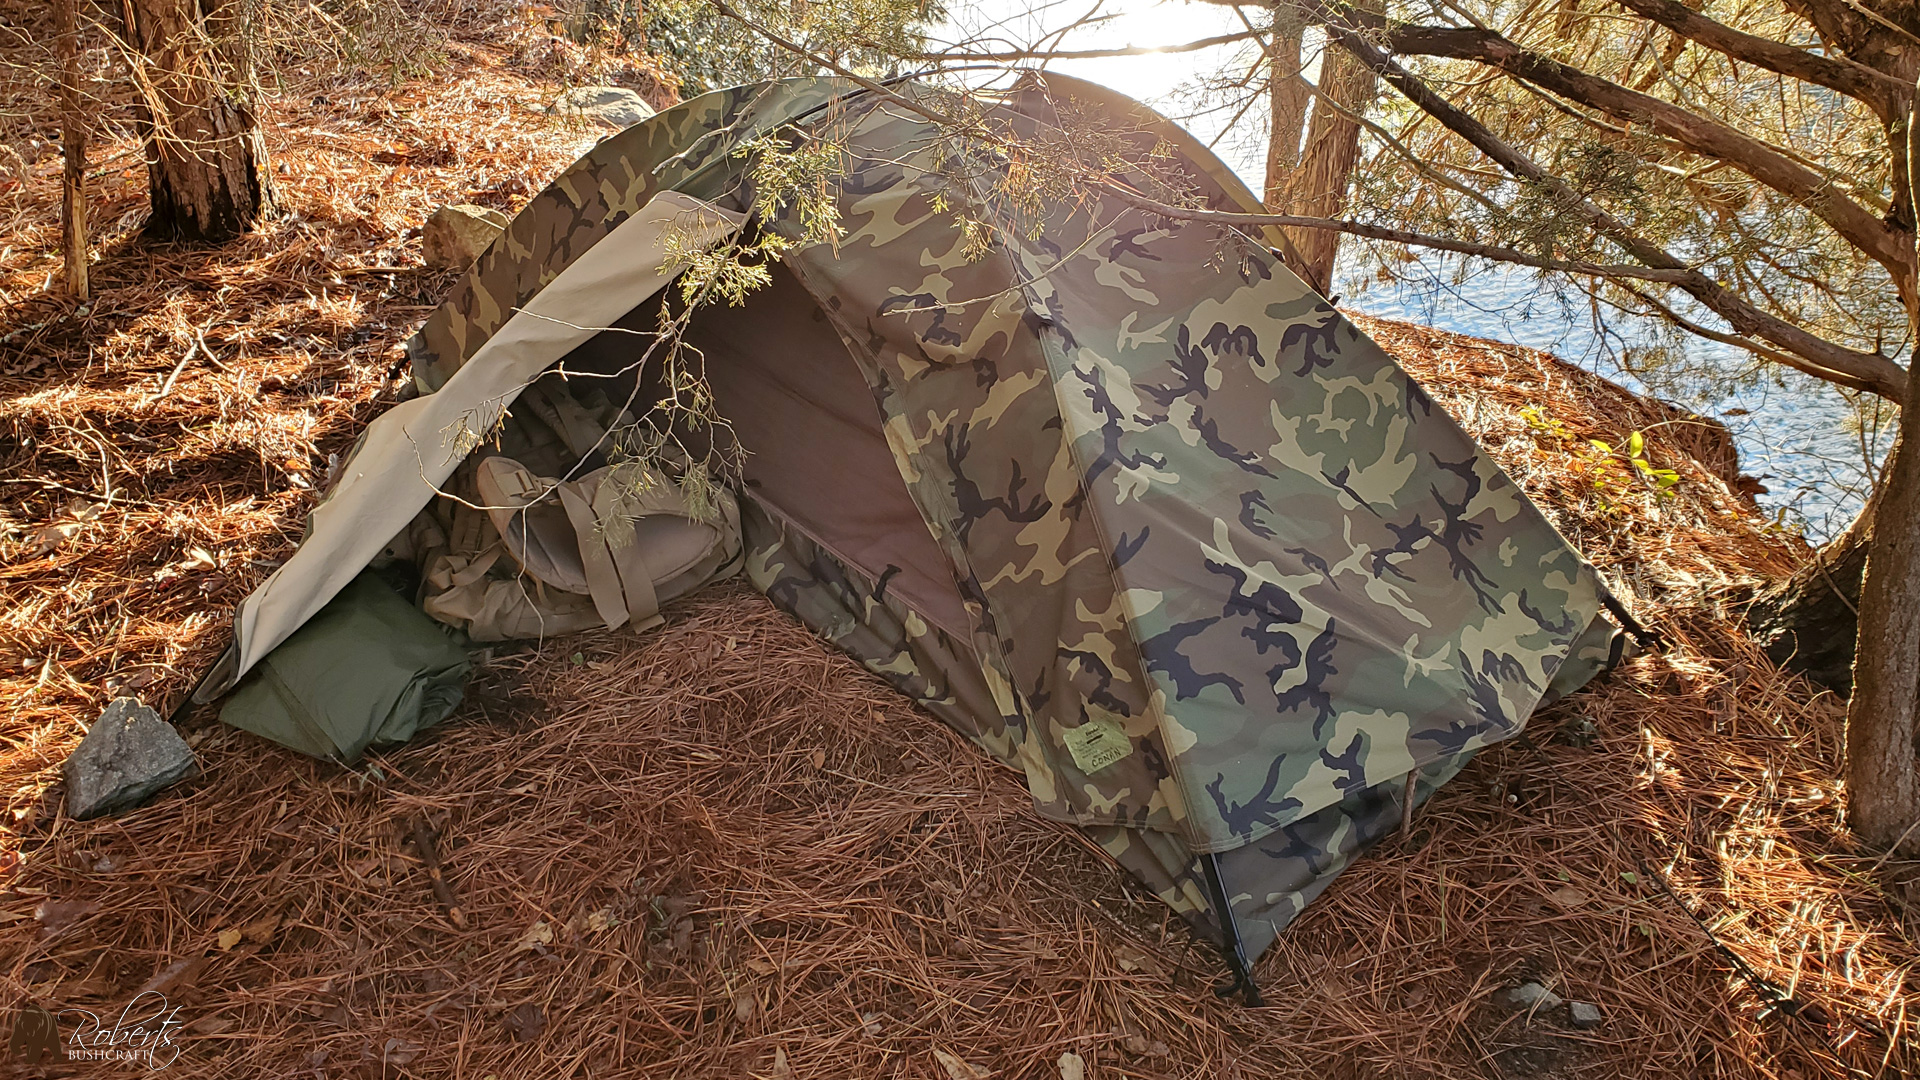 Overnight camping in military surplus one man combat tents TCOP